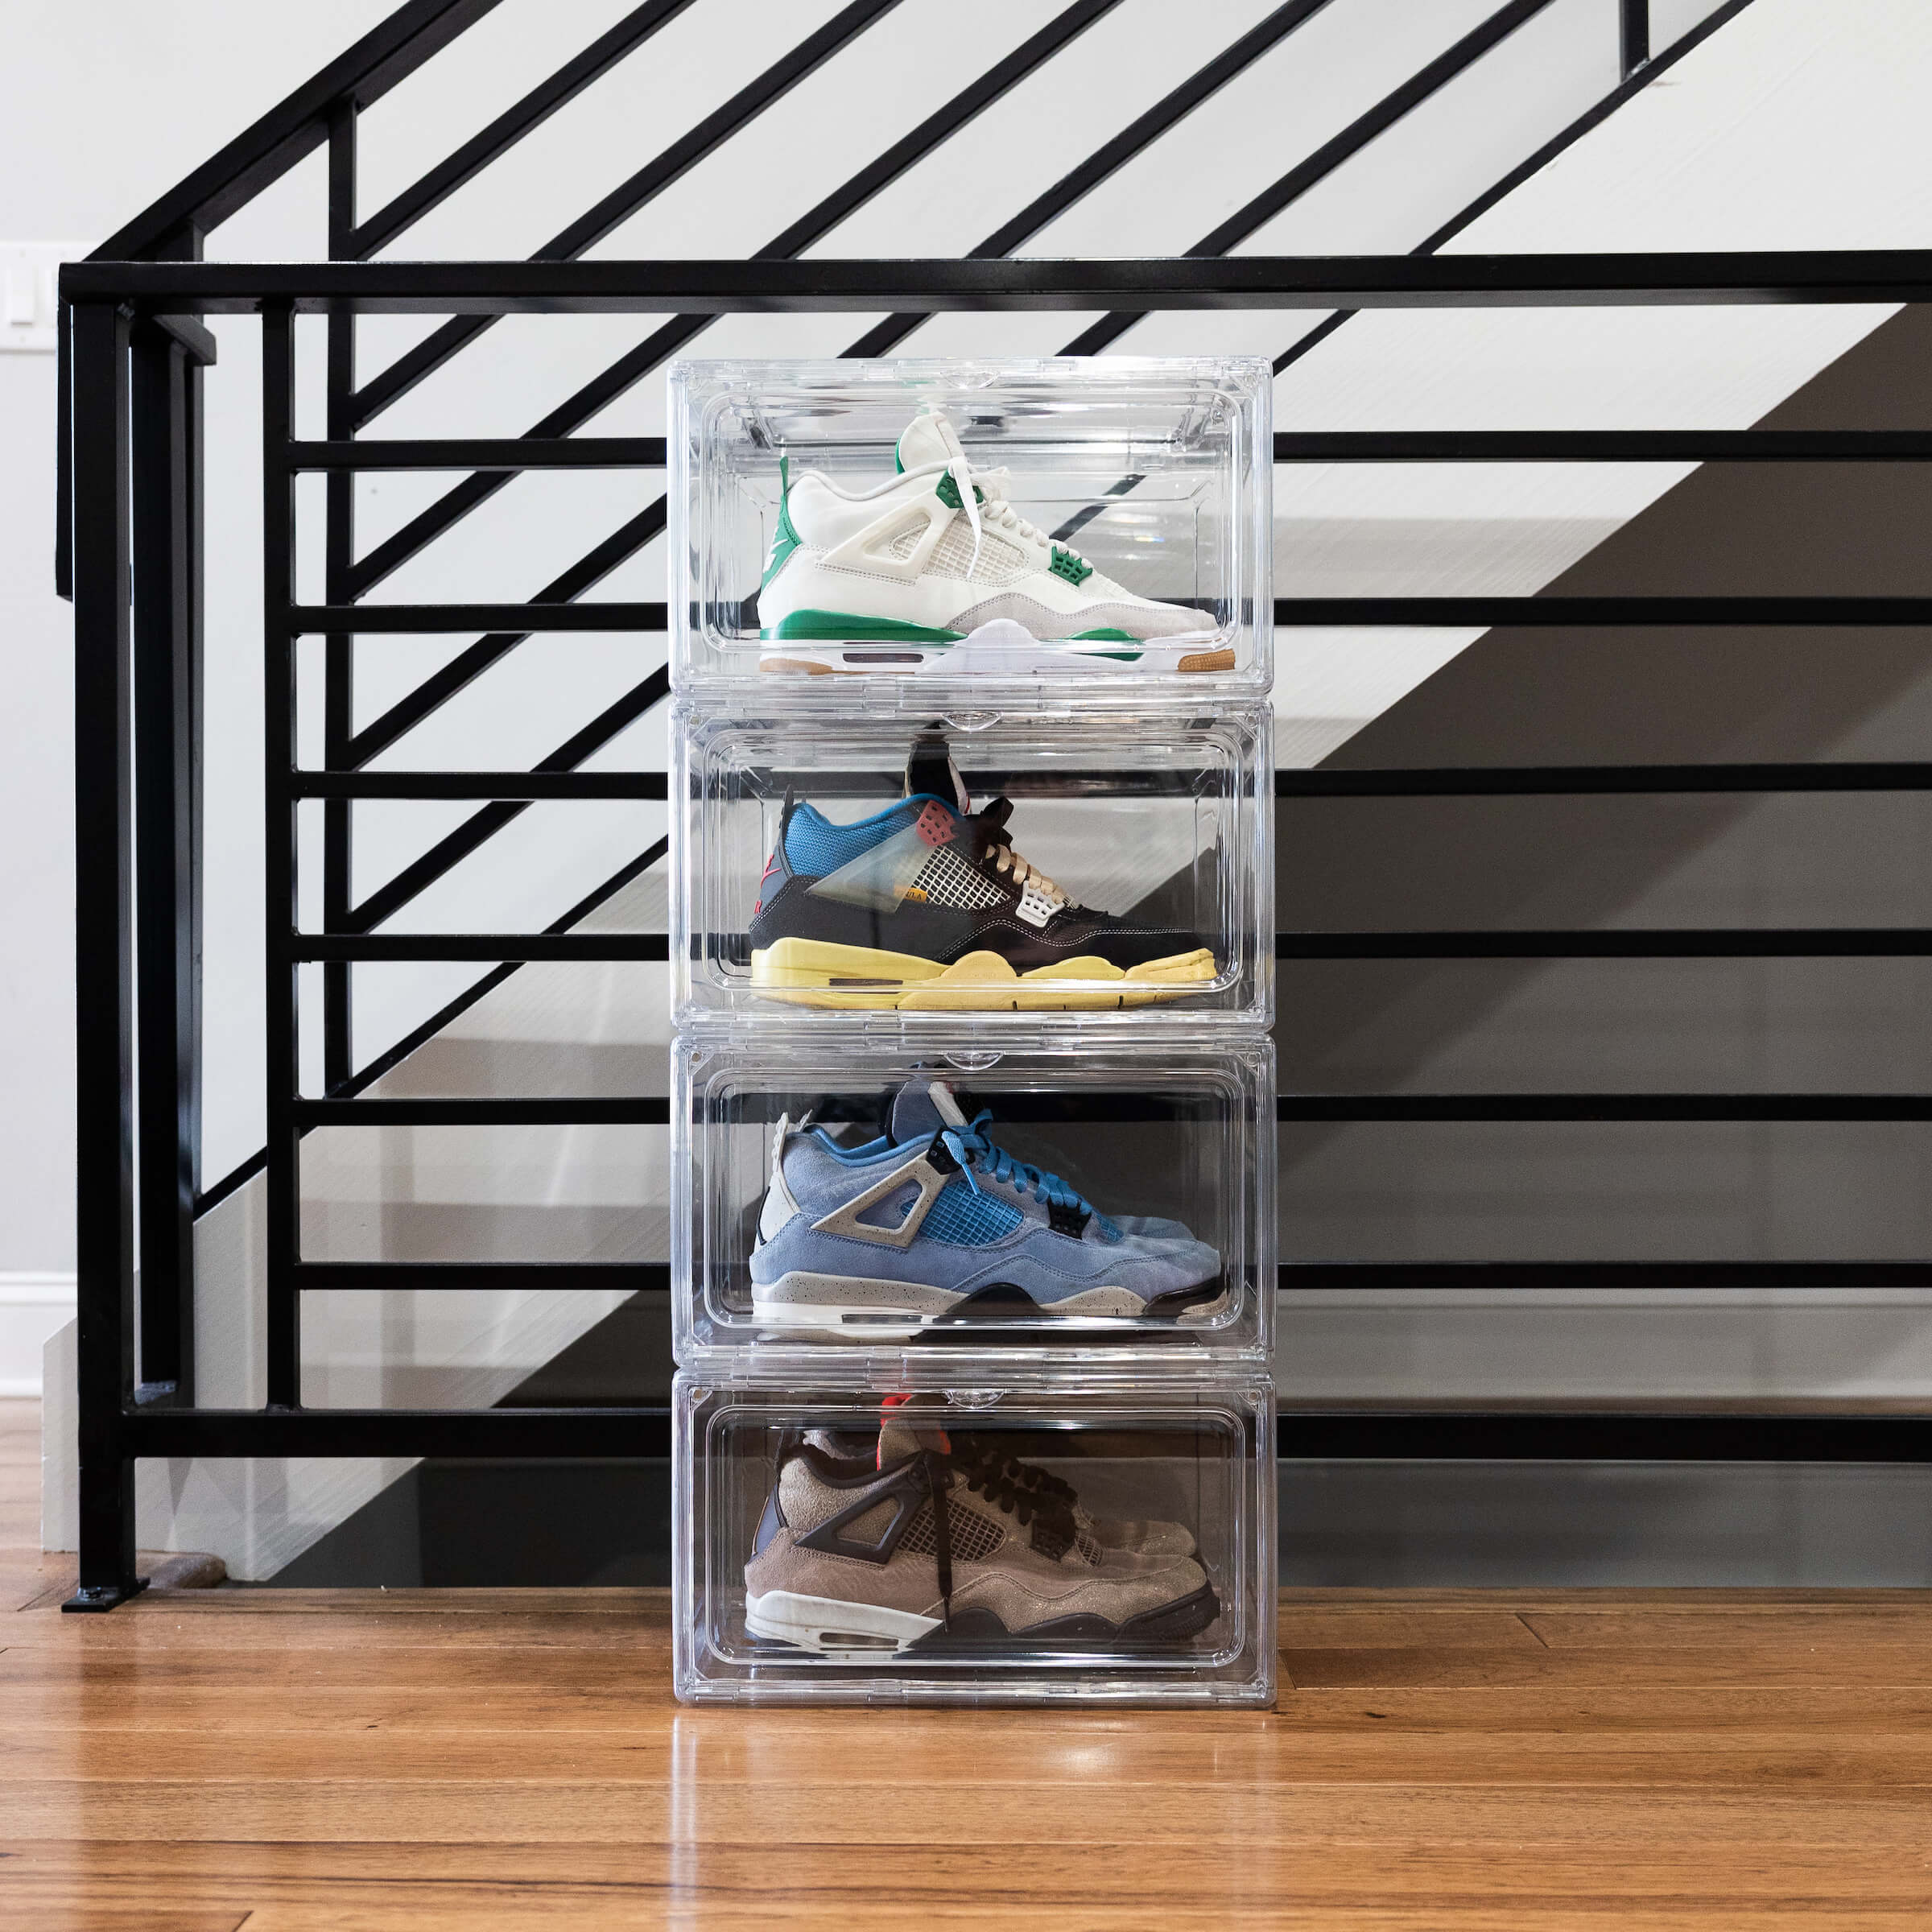 Looksee Designs - Buildable Acrylic Shoe Display Cases - Shoe storage - Shoe Boxes - Shoe Box Storage